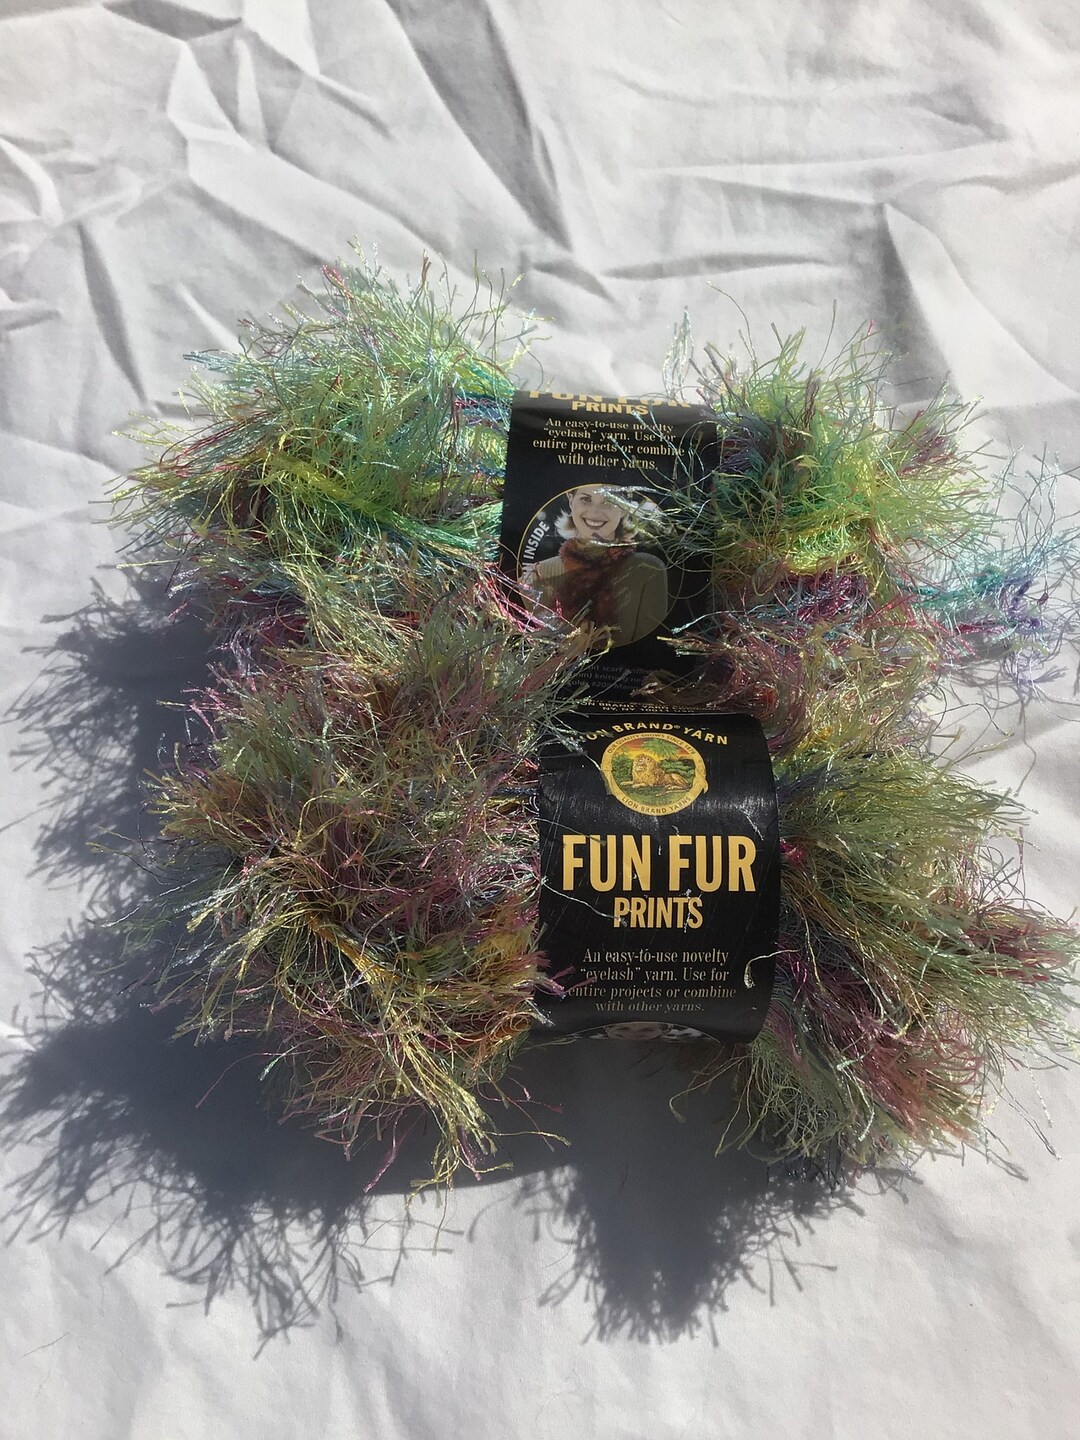 Lot of 2 Skeins Fun Fur Lion Brand Yarn Varigated Color New and